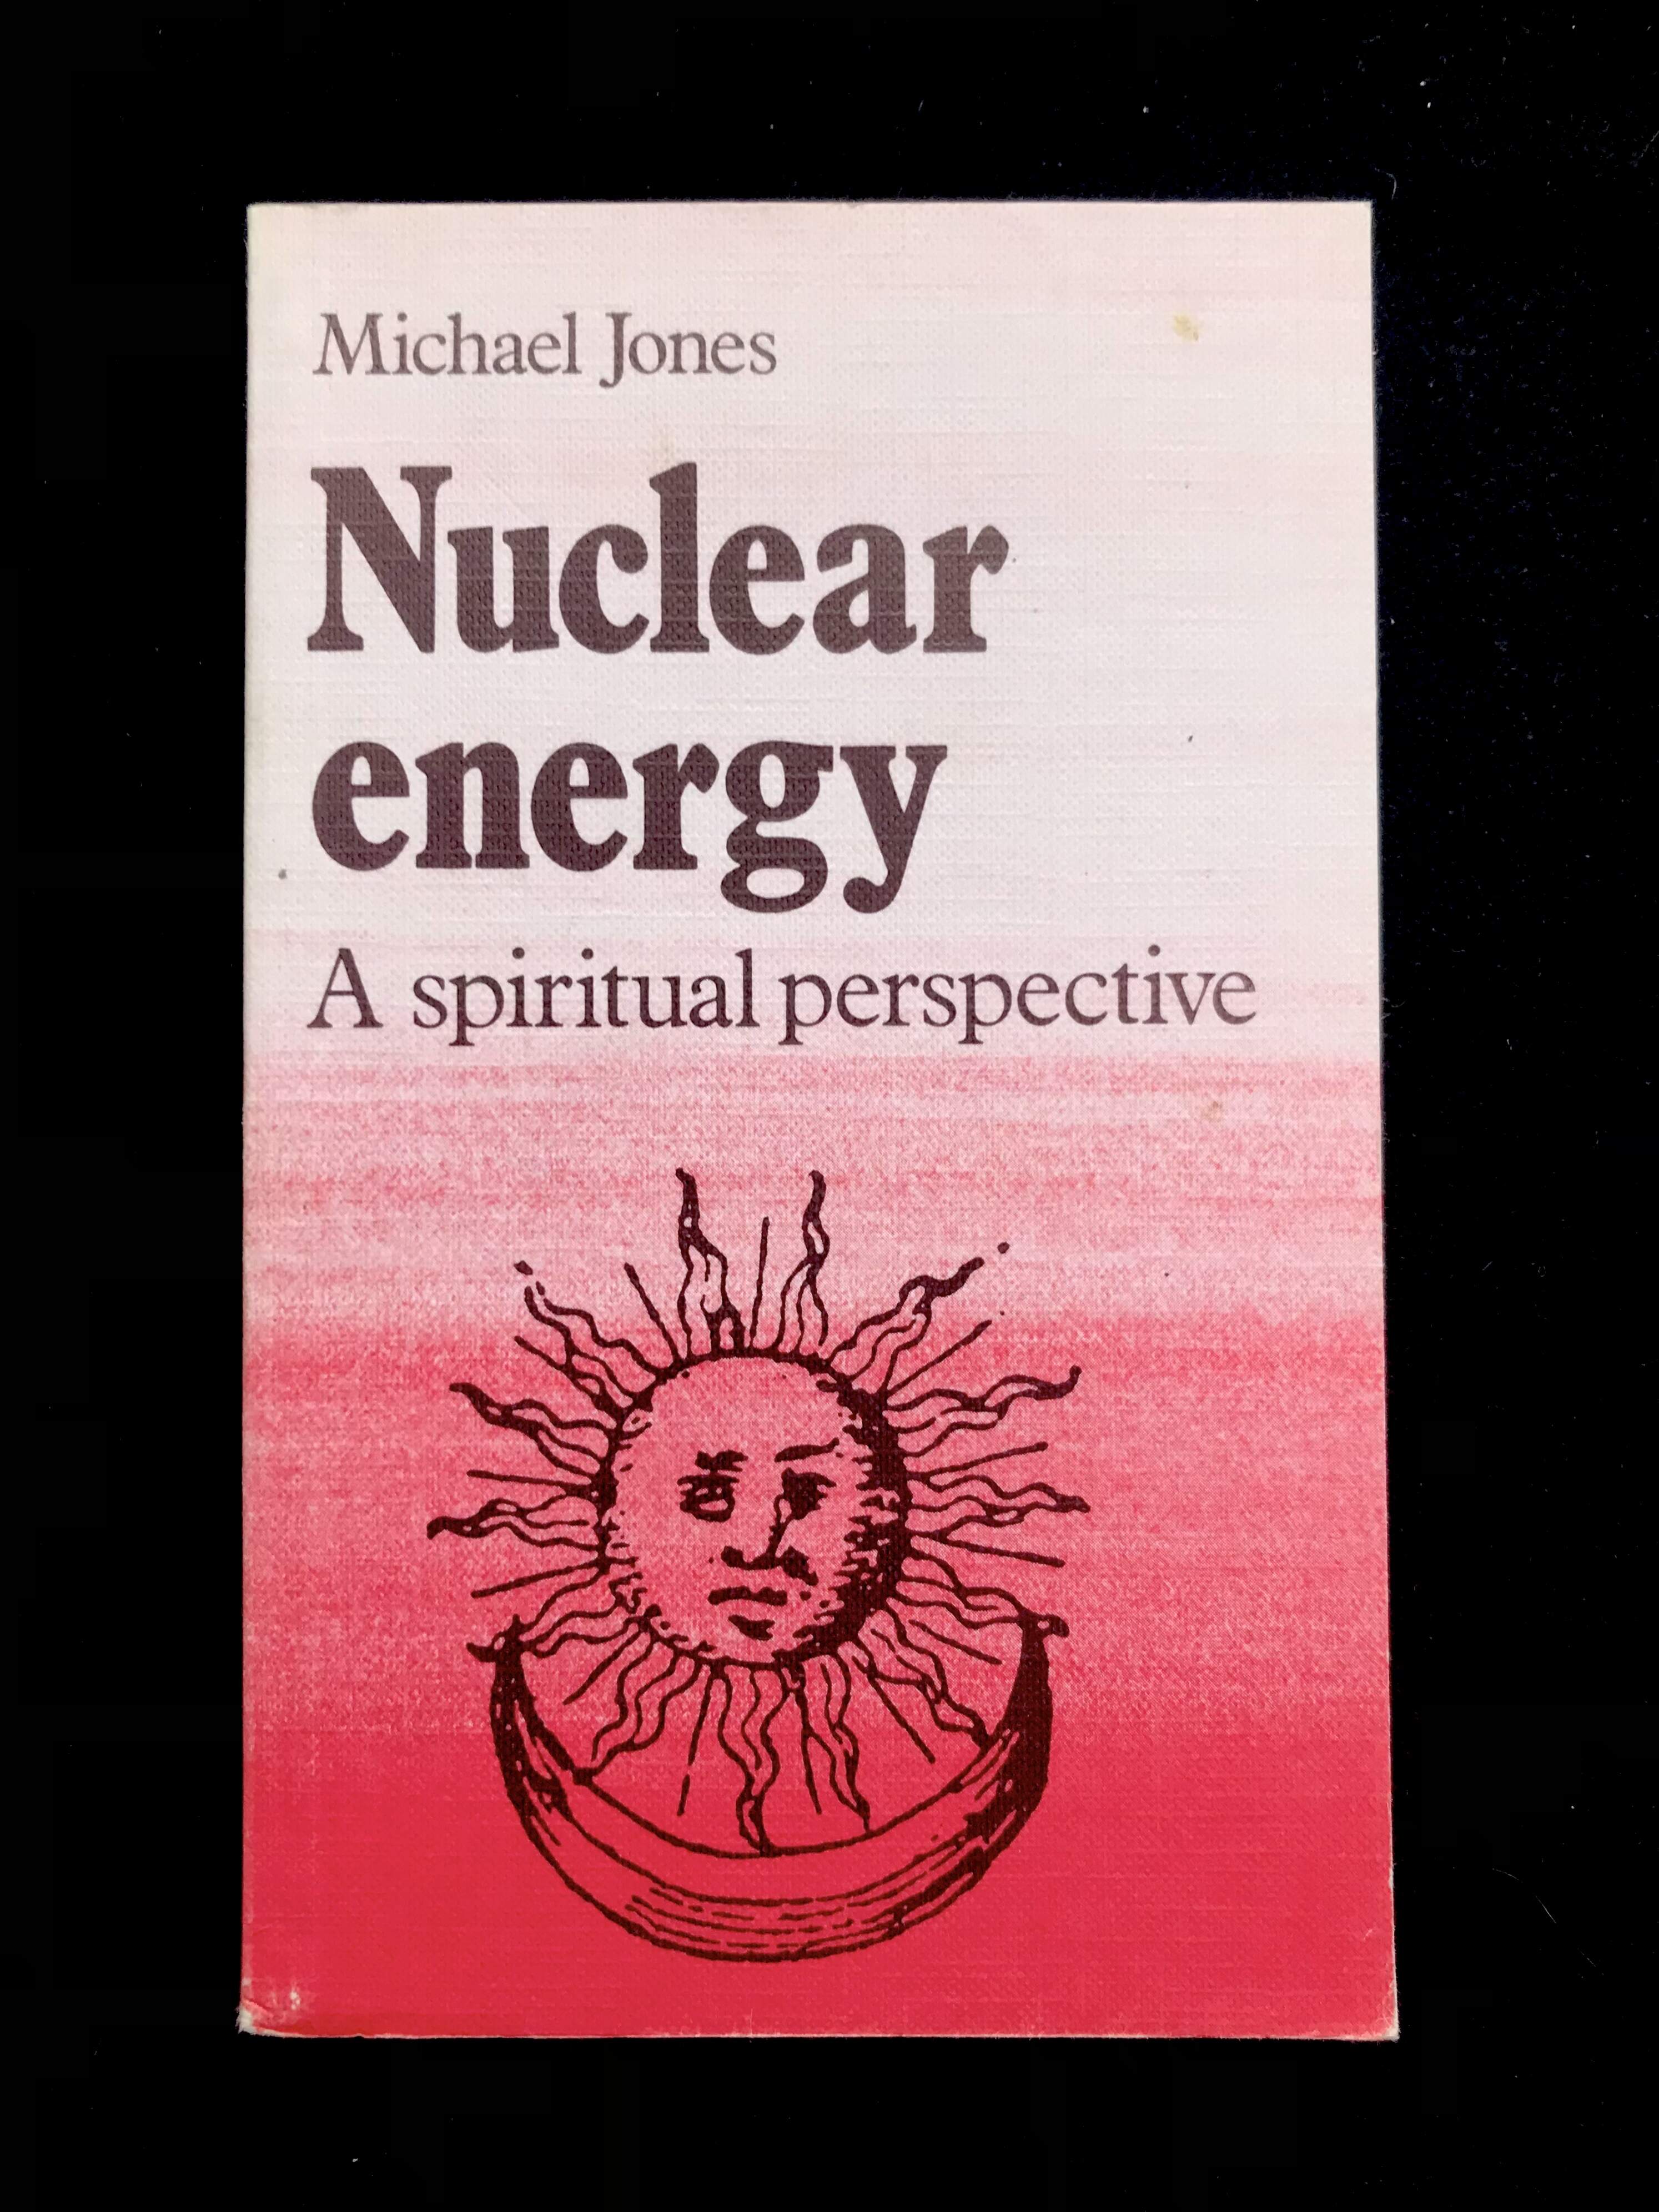 Nuclear Energy: A Spiritual Perspective by Michael Jones